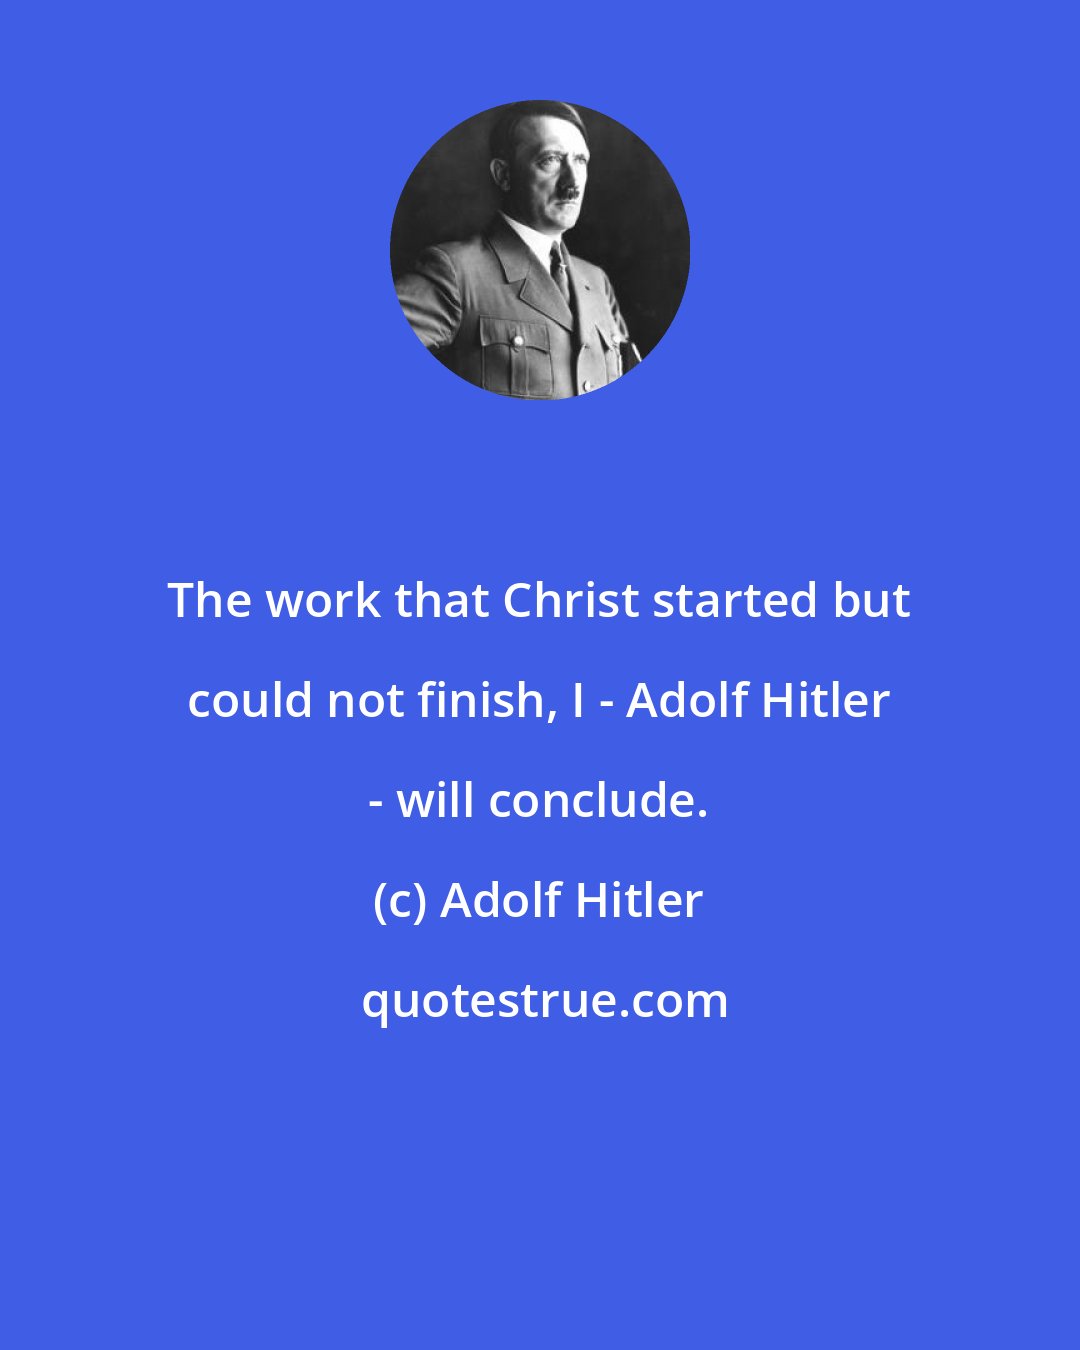 Adolf Hitler: The work that Christ started but could not finish, I - Adolf Hitler - will conclude.